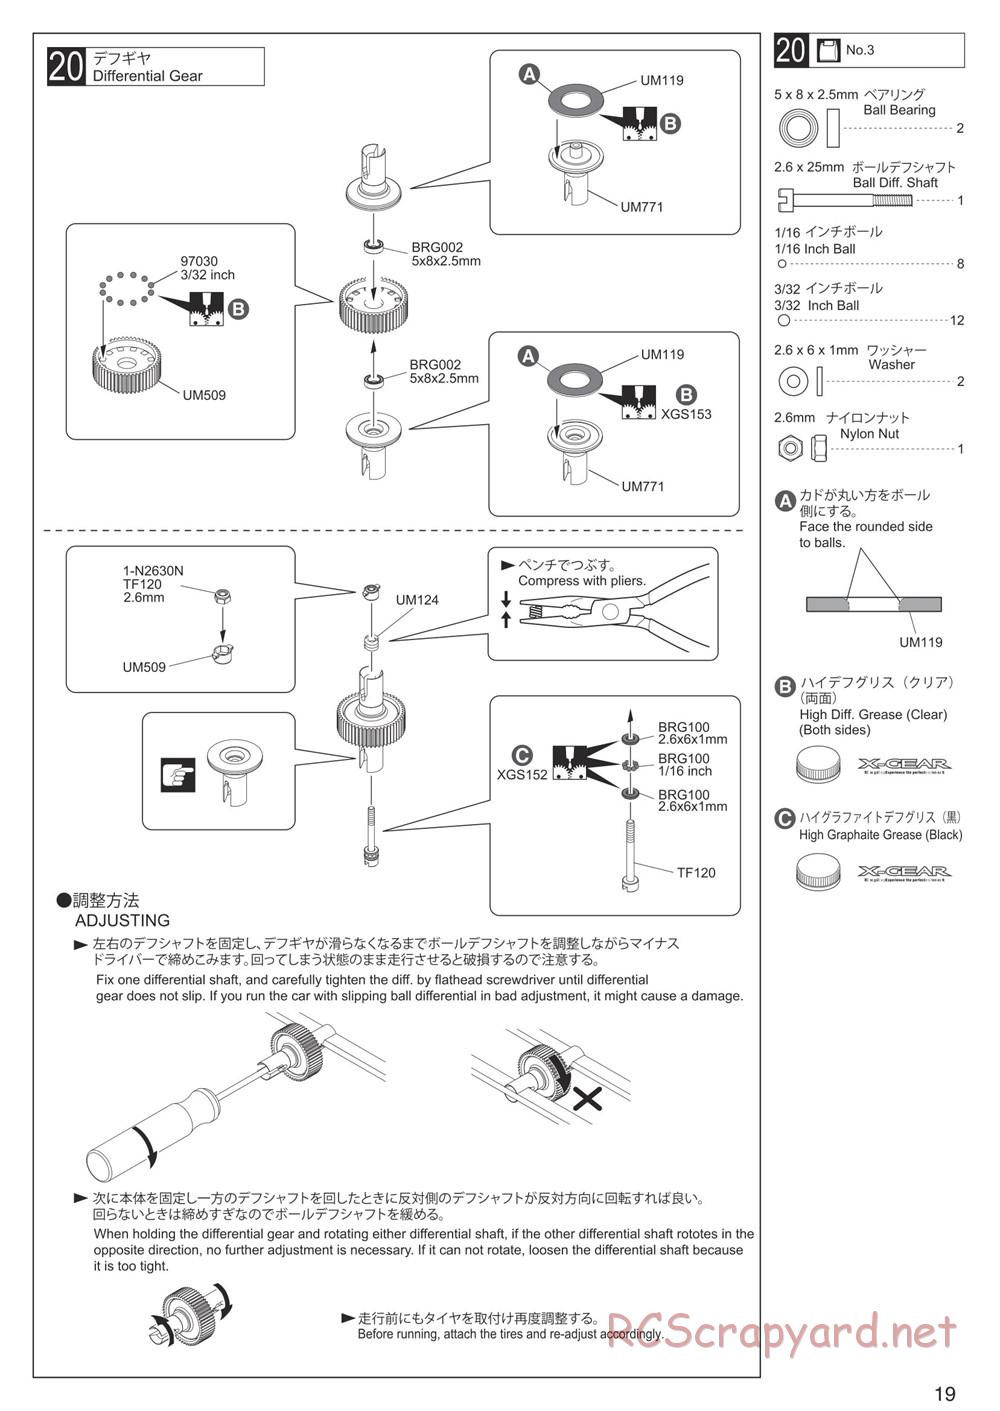 Kyosho - Ultima RB7SS - Manual - Page 19